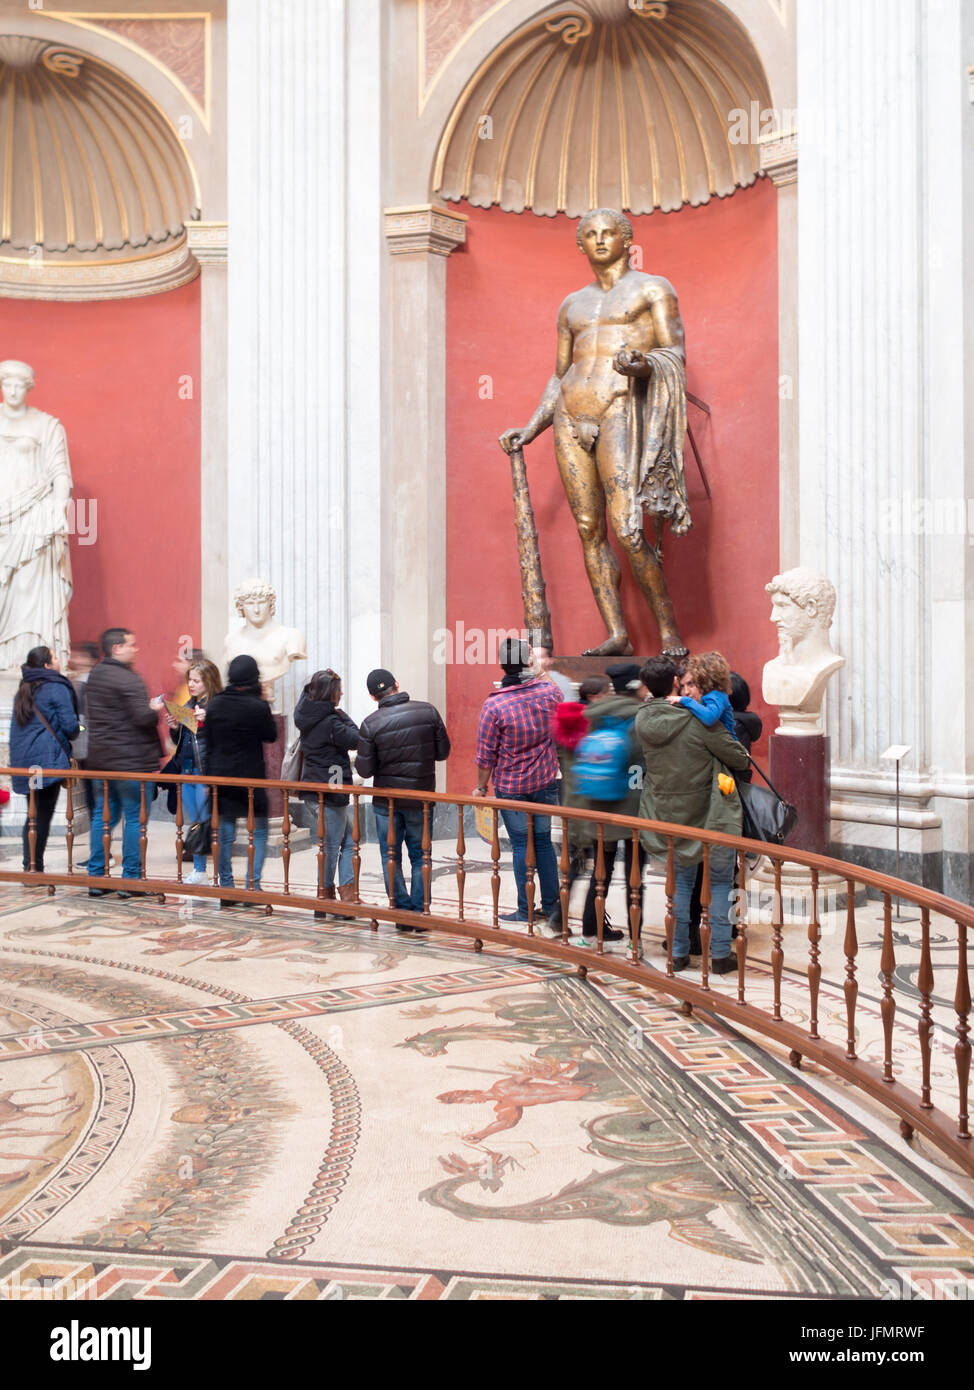 Visitors to the Vatican Museum admiring the art works Stock Photo